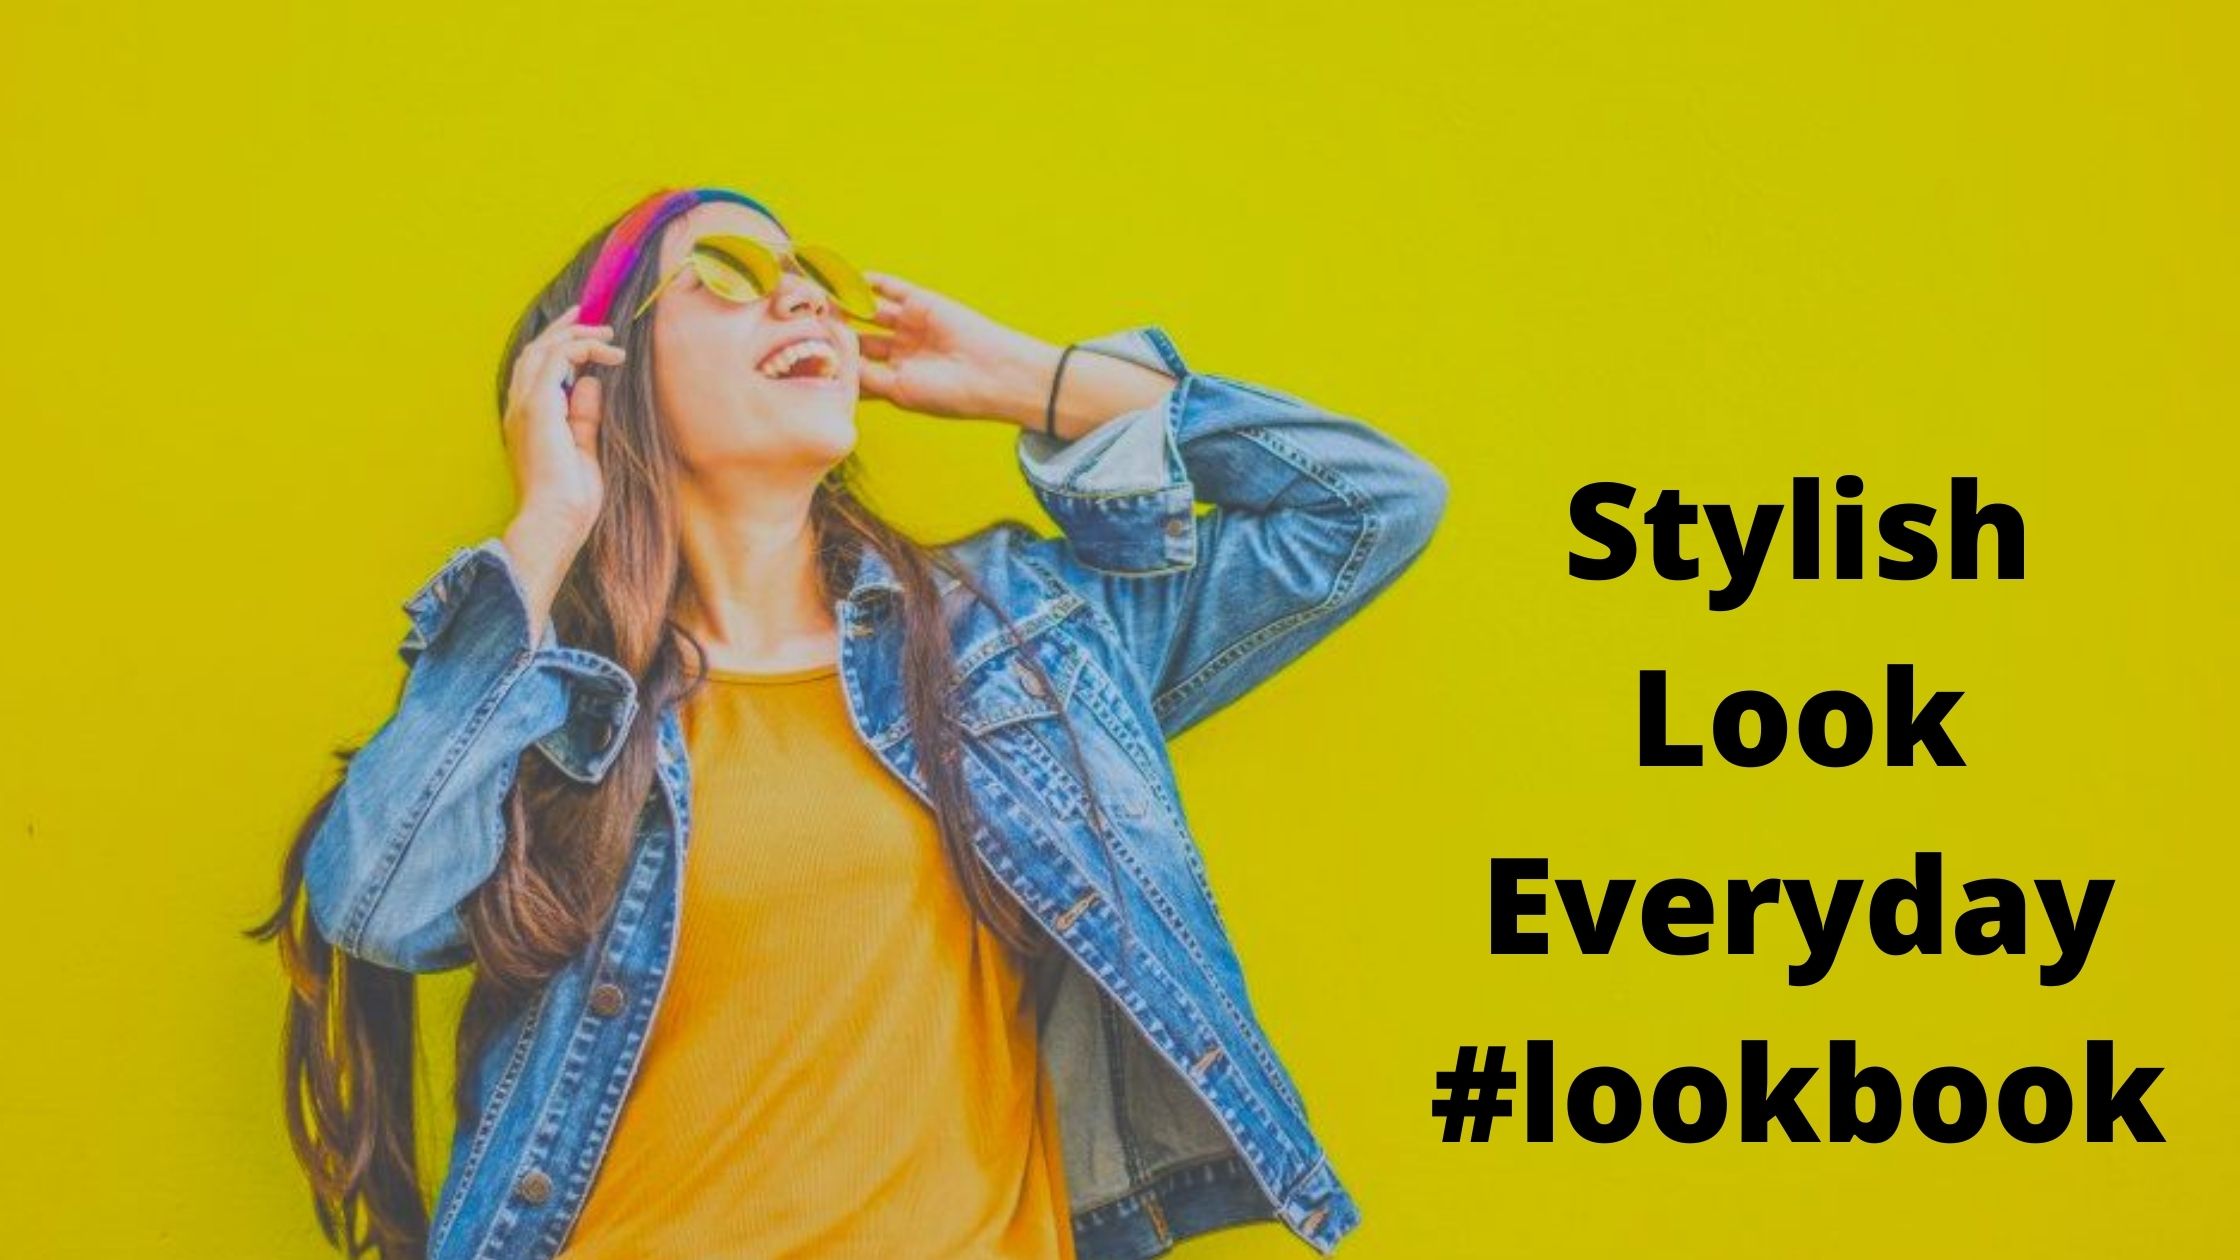 You are currently viewing Stylish Look Everyday: -#lookbook